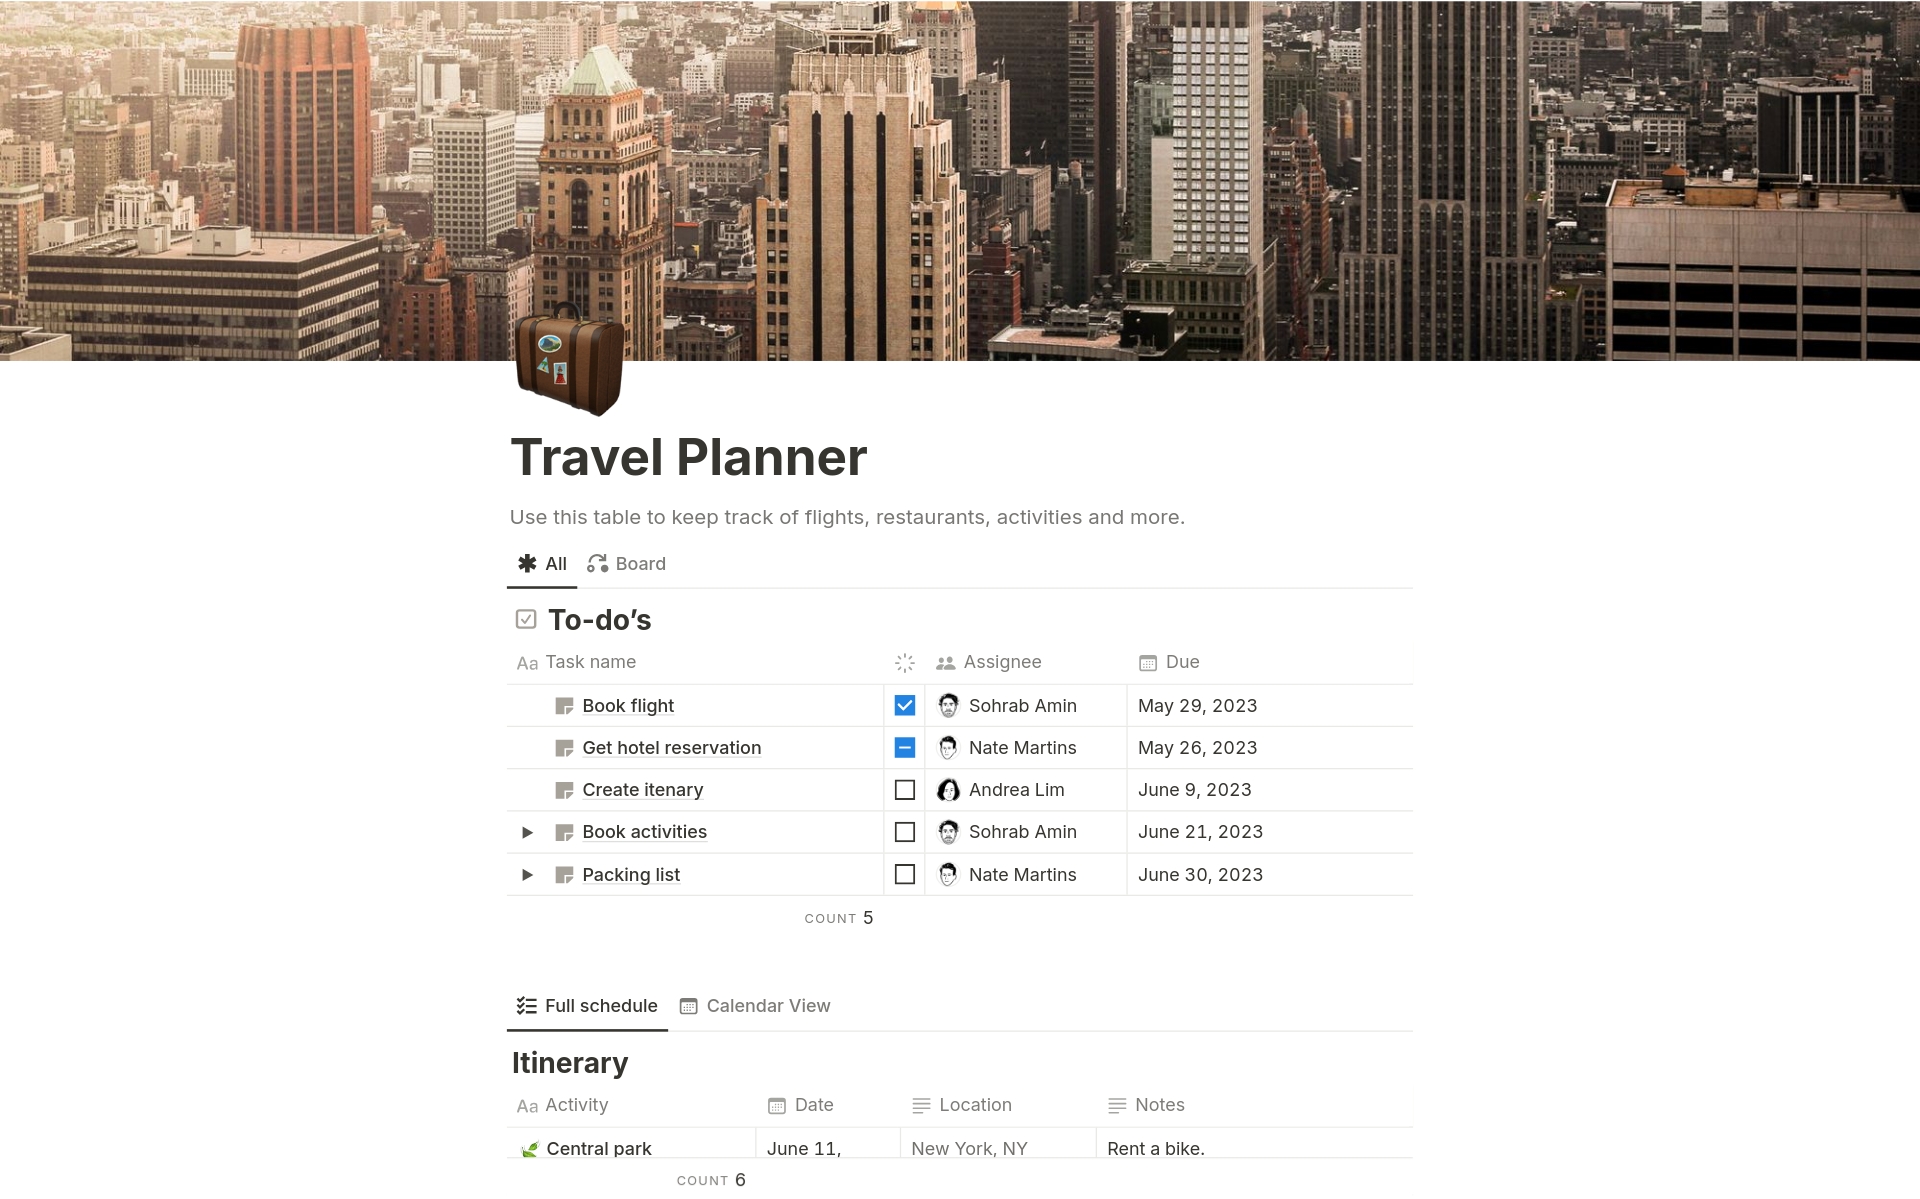 Pull all the essential details about your travel plans into one spot.